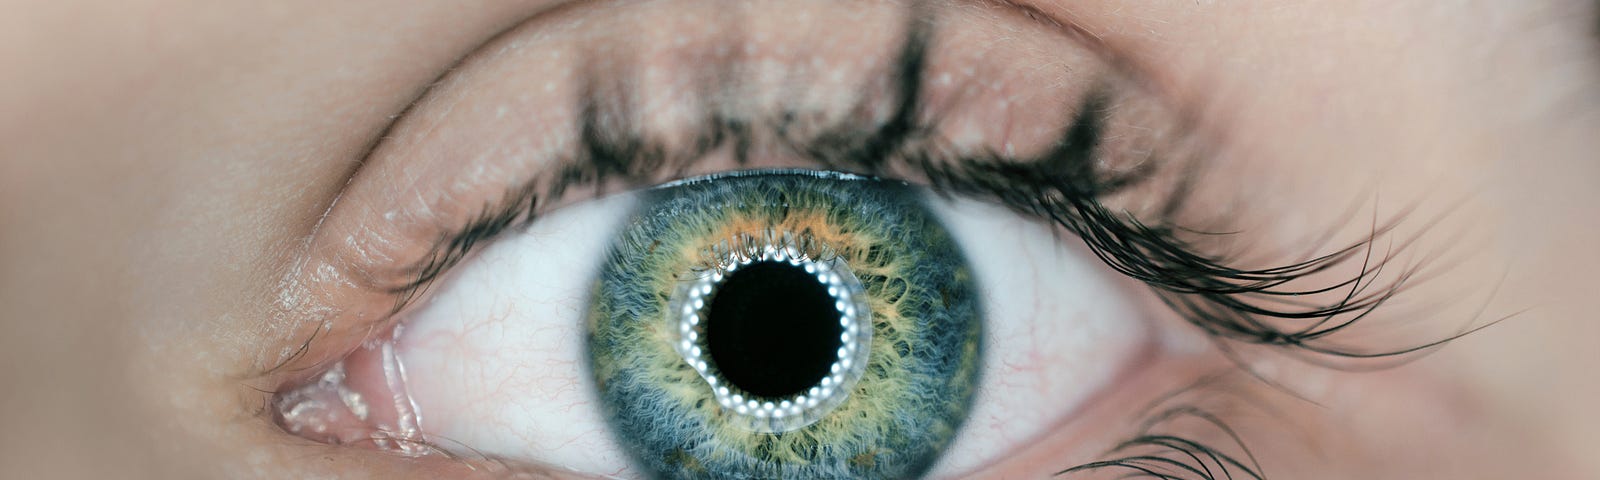 A close up image of a woman’s green eyes that seem to show matrix codes inside.